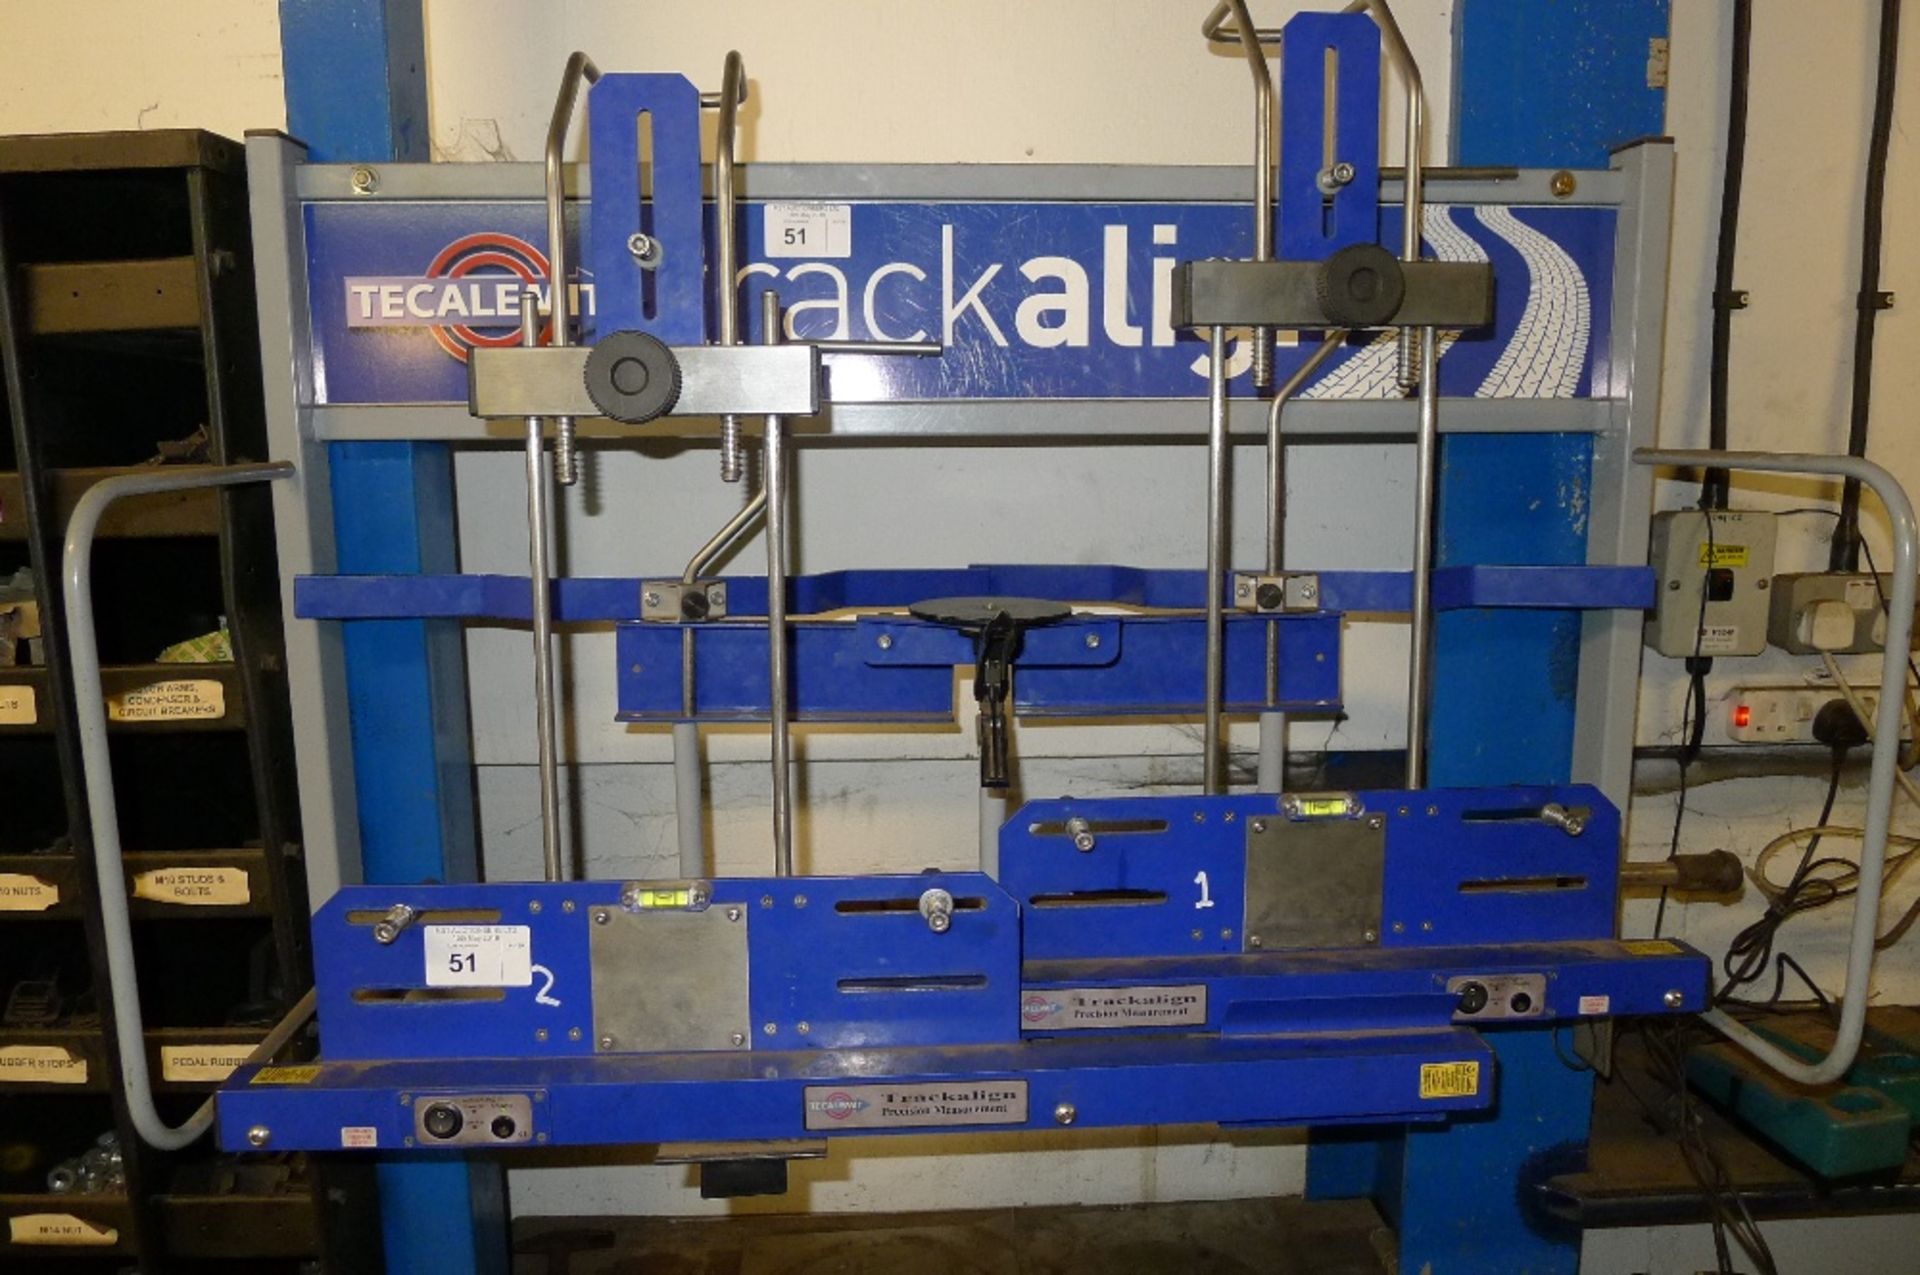 A Tecalemit laser Track Align system with 2 radius plates